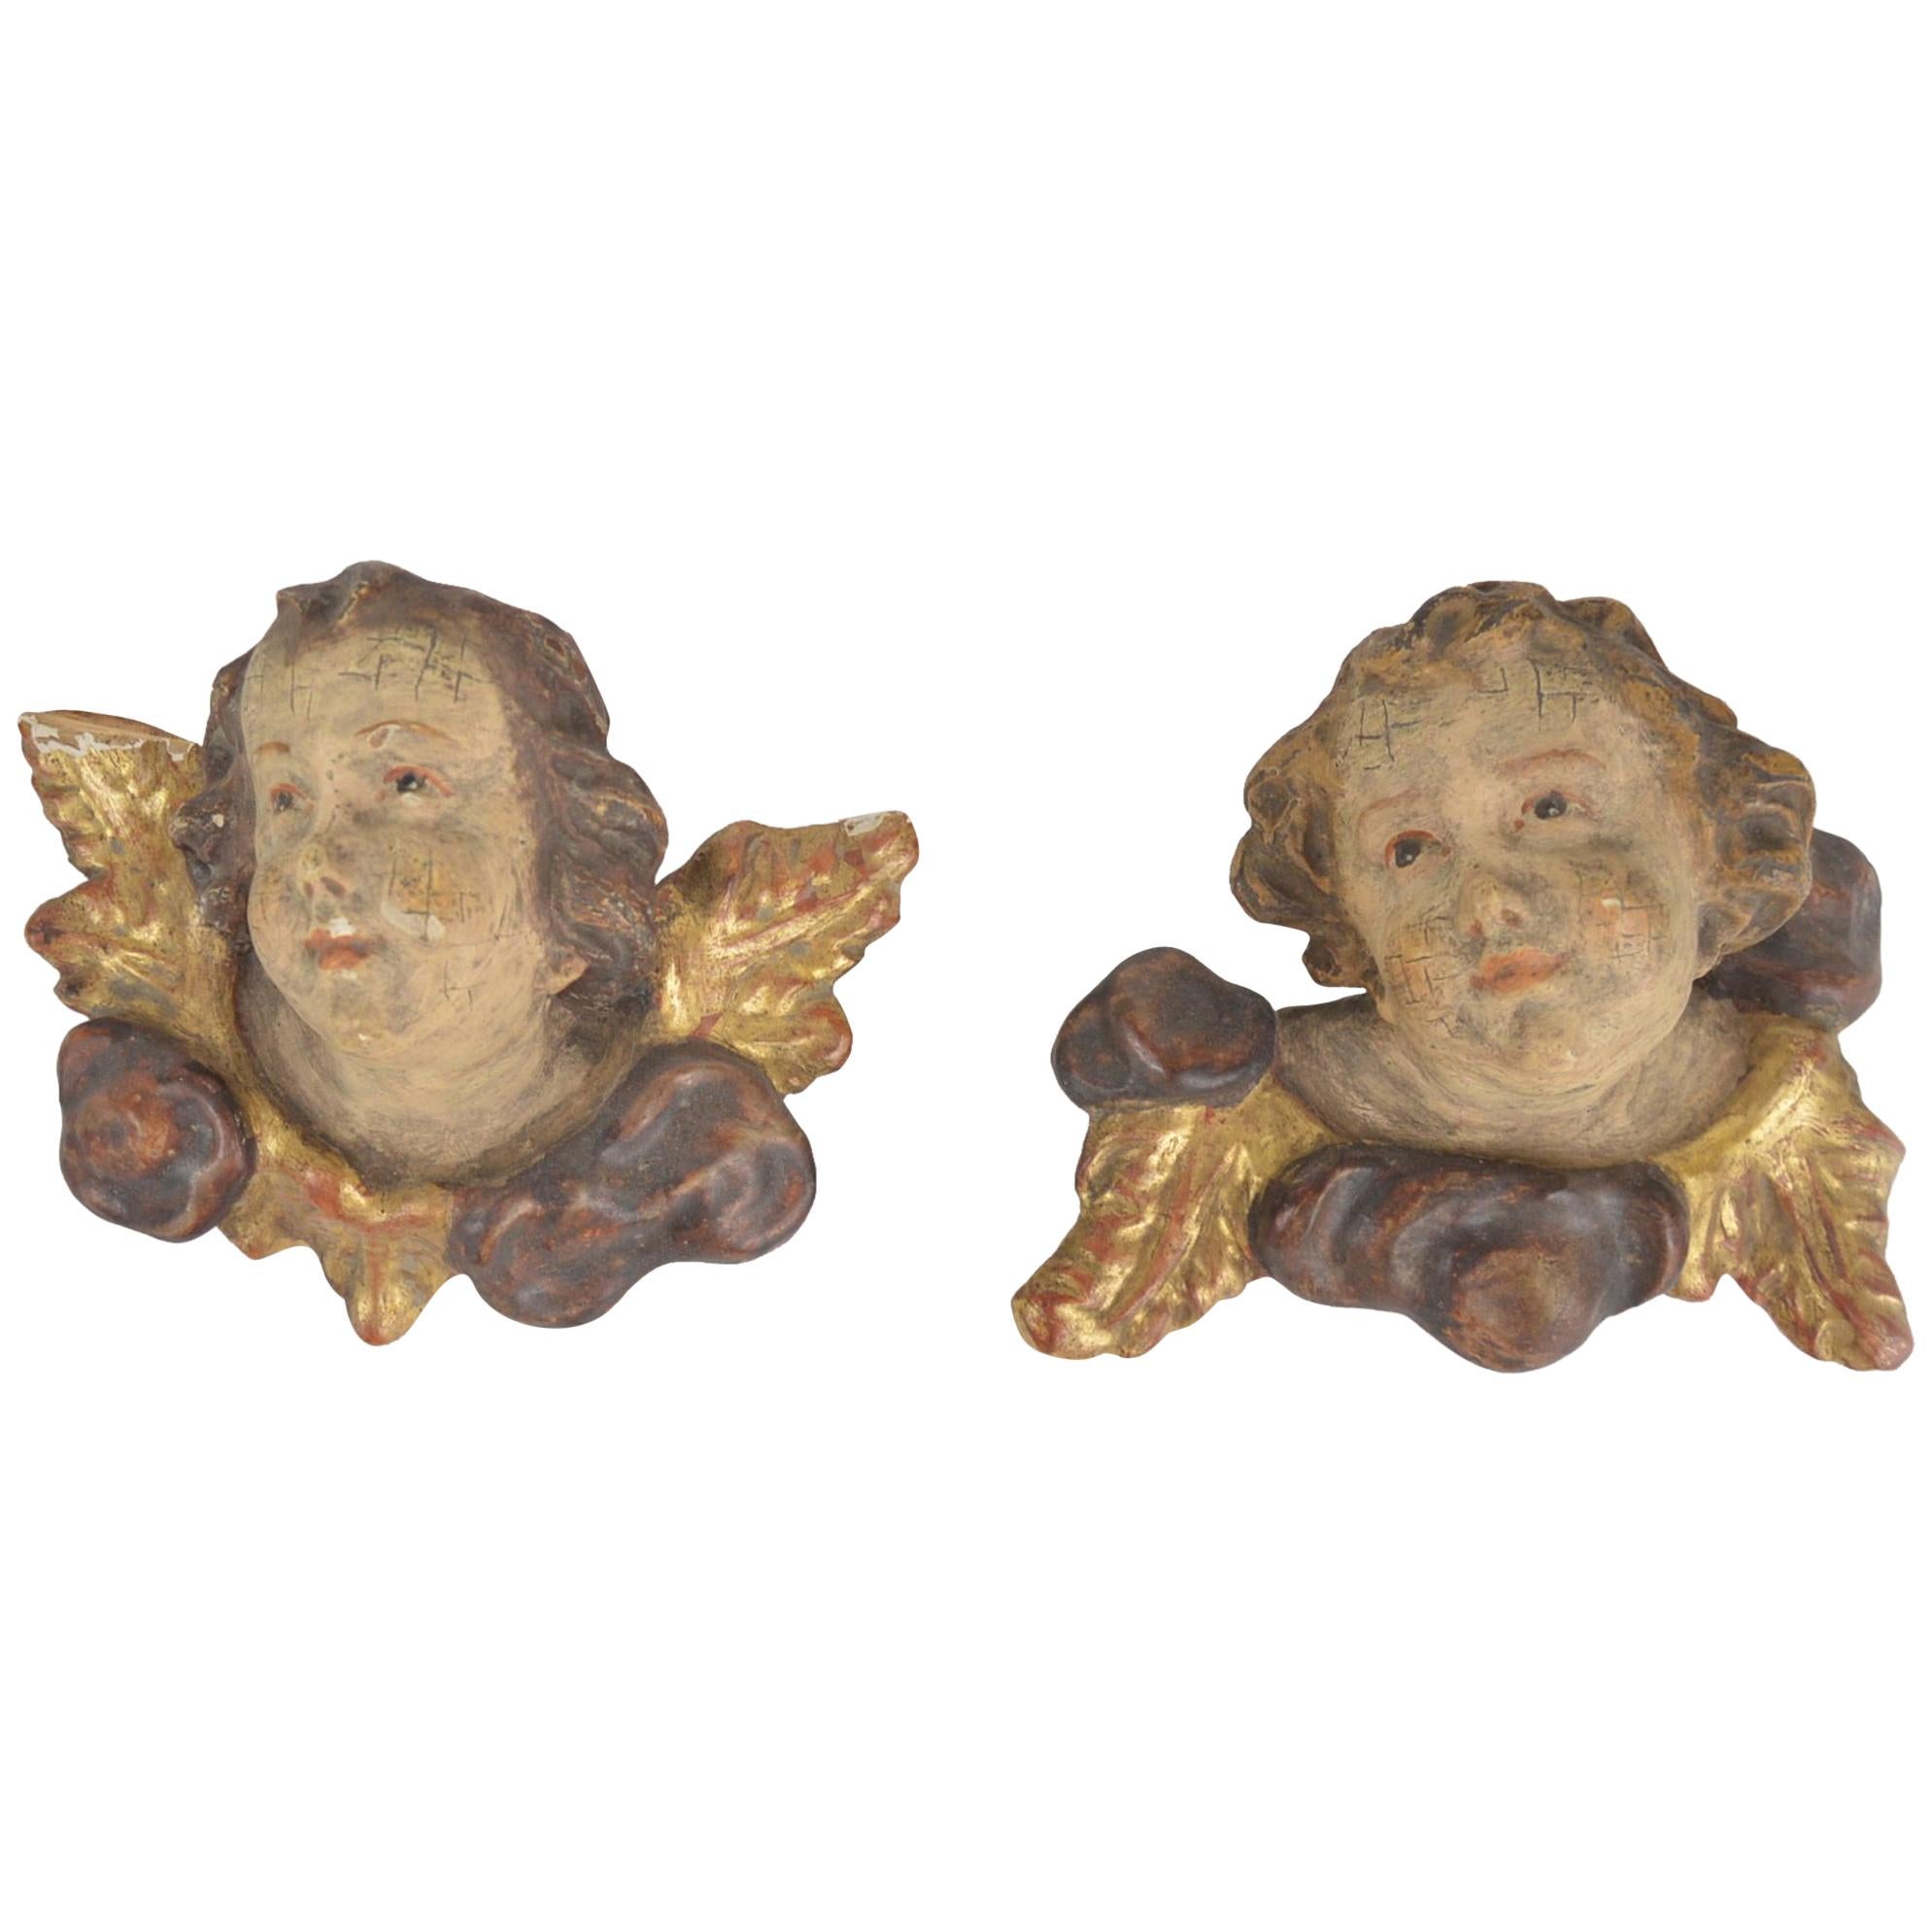 Pair of Wooden Sculptures Angel Heads, 19th Century